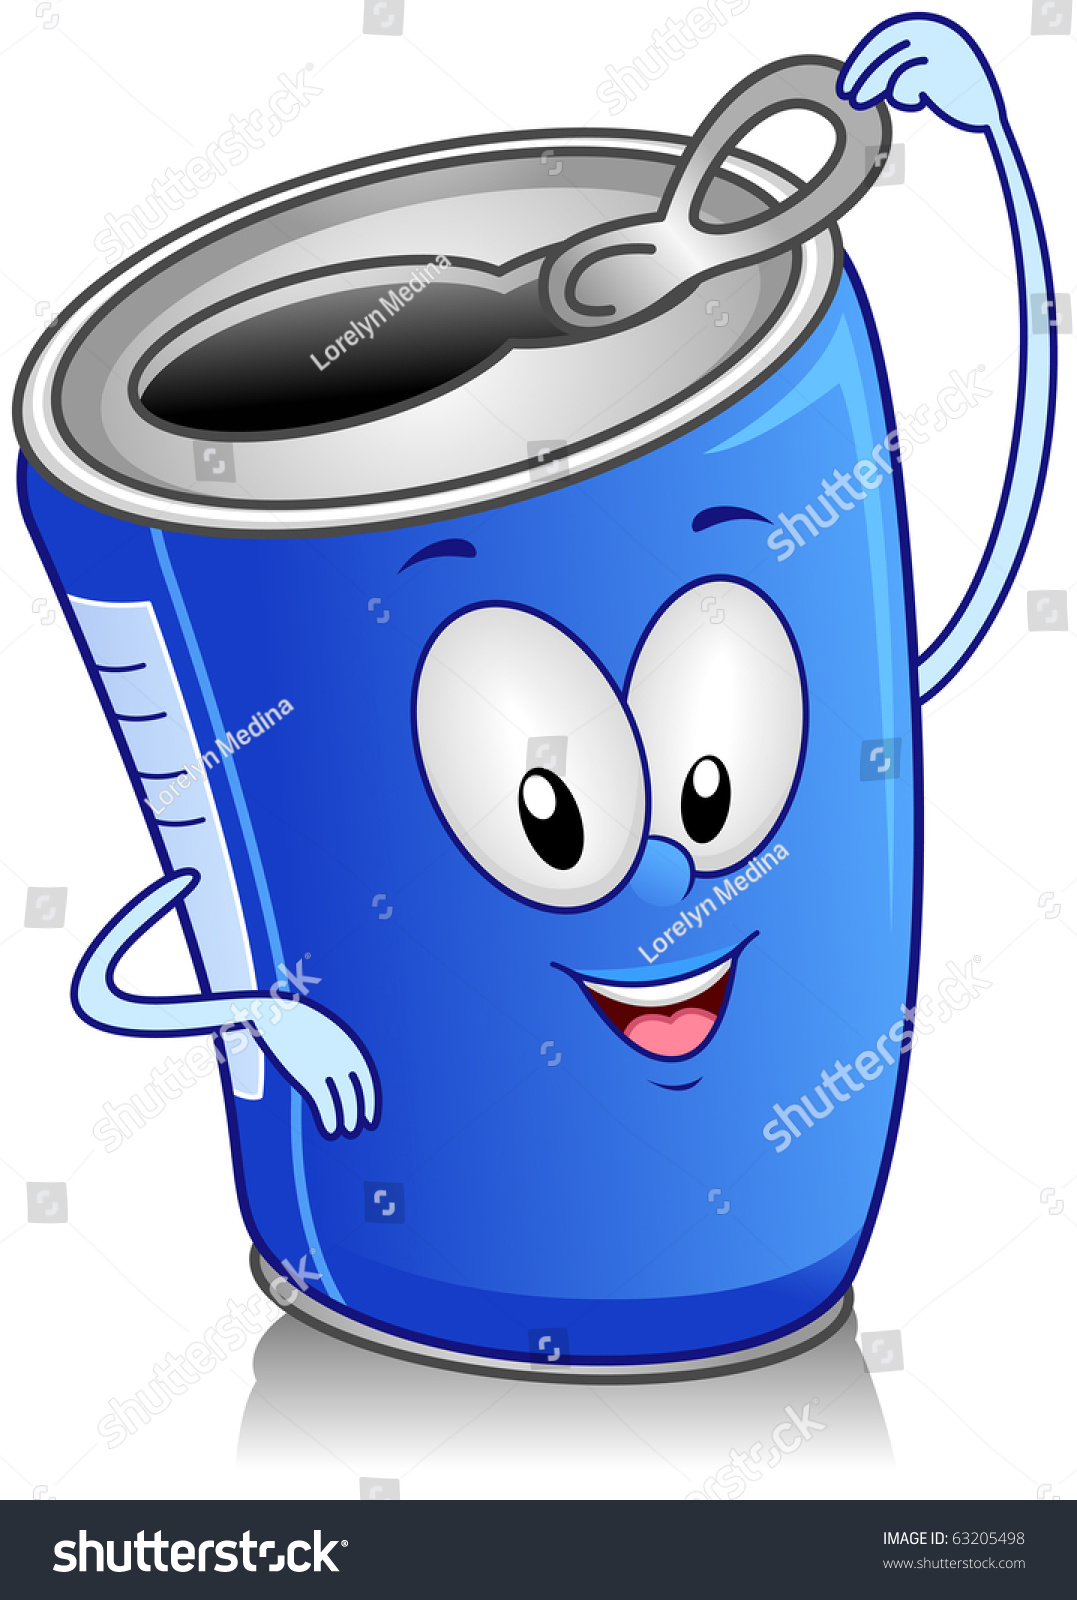 Illustration Of Canned Drink Character - 63205498 : Shutterstock